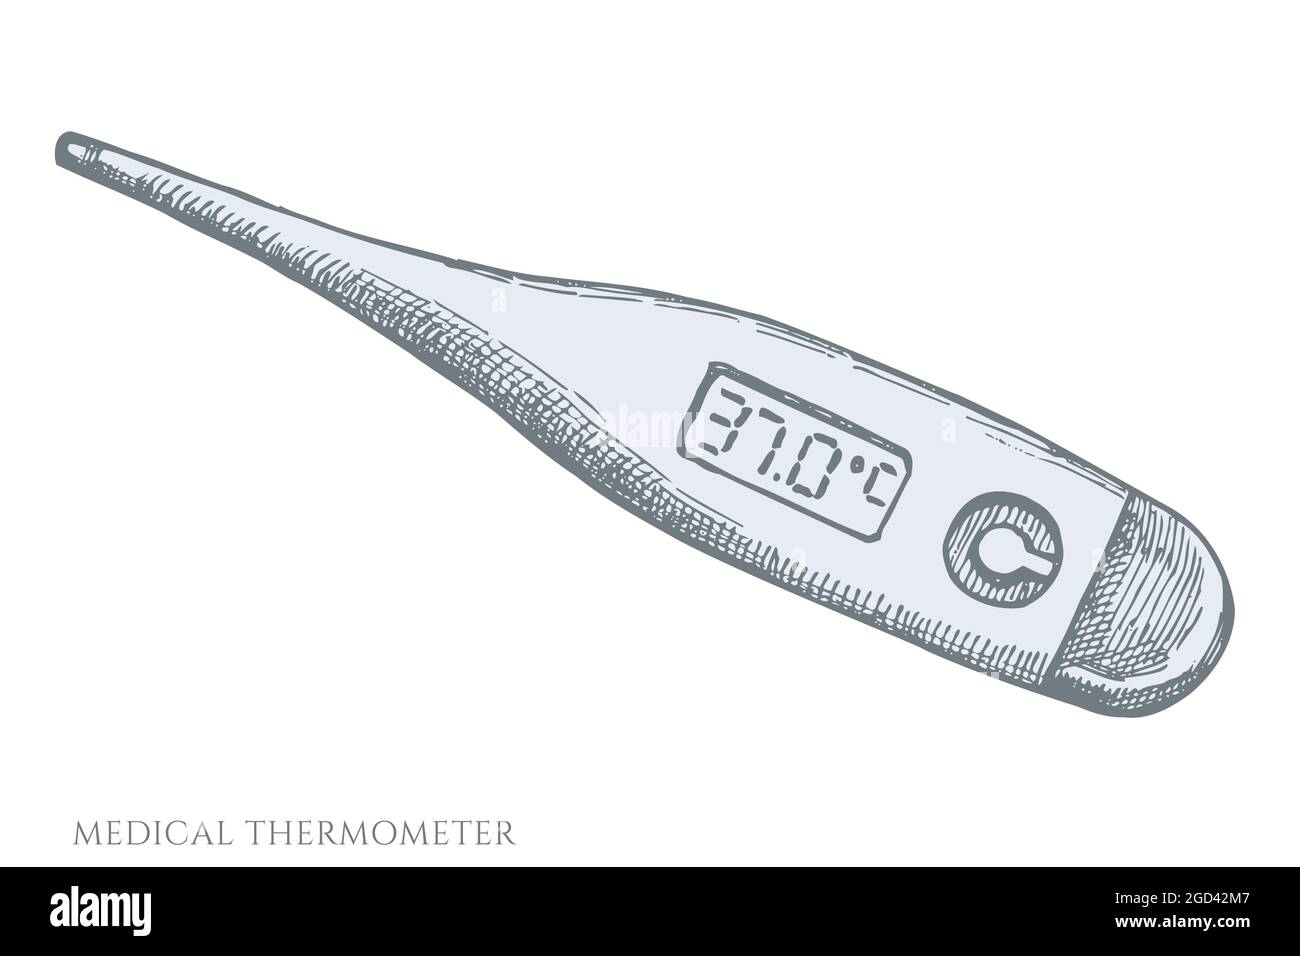 https://c8.alamy.com/comp/2GD42M7/vector-set-of-hand-drawn-pastel-medical-thermometer-2GD42M7.jpg